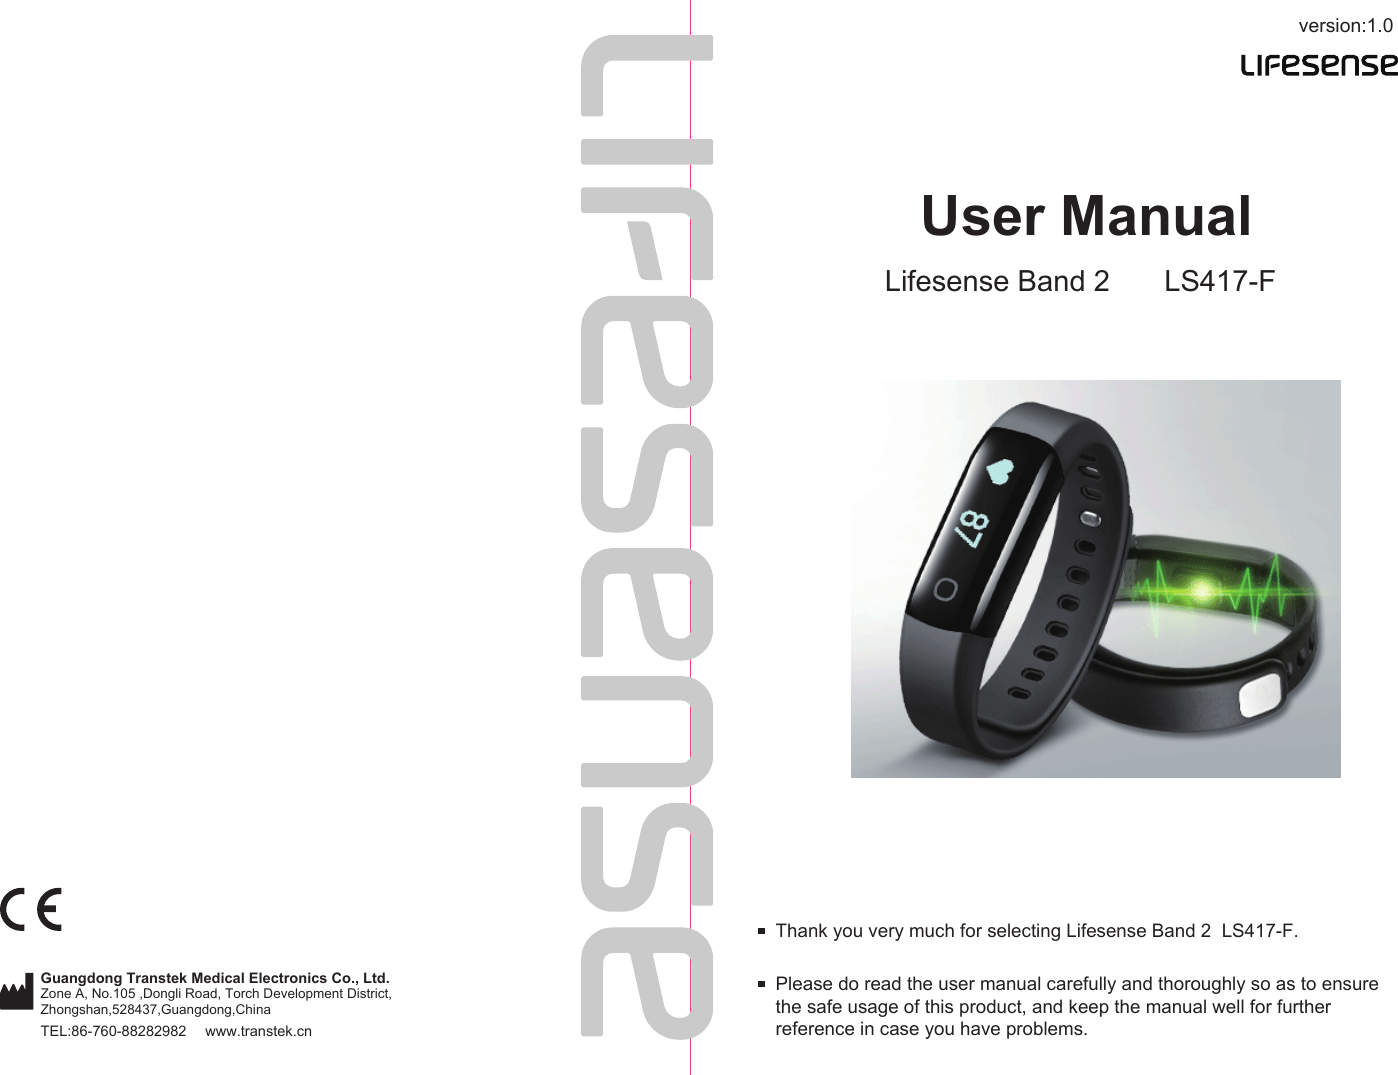 version:1.0TEL:86-760-88282982  www.transtek.cnUser ManualLifesense Band 2 LS417-FPlease do read the user manual carefully and thoroughly so as to ensure the safe usage of this product, and keep the manual well for further reference in case you have problems.Thank you very much for selecting Lifesense Band 2  LS417-F.Guangdong Transtek Medical Electronics Co., Ltd.Zone A, No.105 ,Dongli Road, Torch Development District, Zhongshan,528437,Guangdong,China  